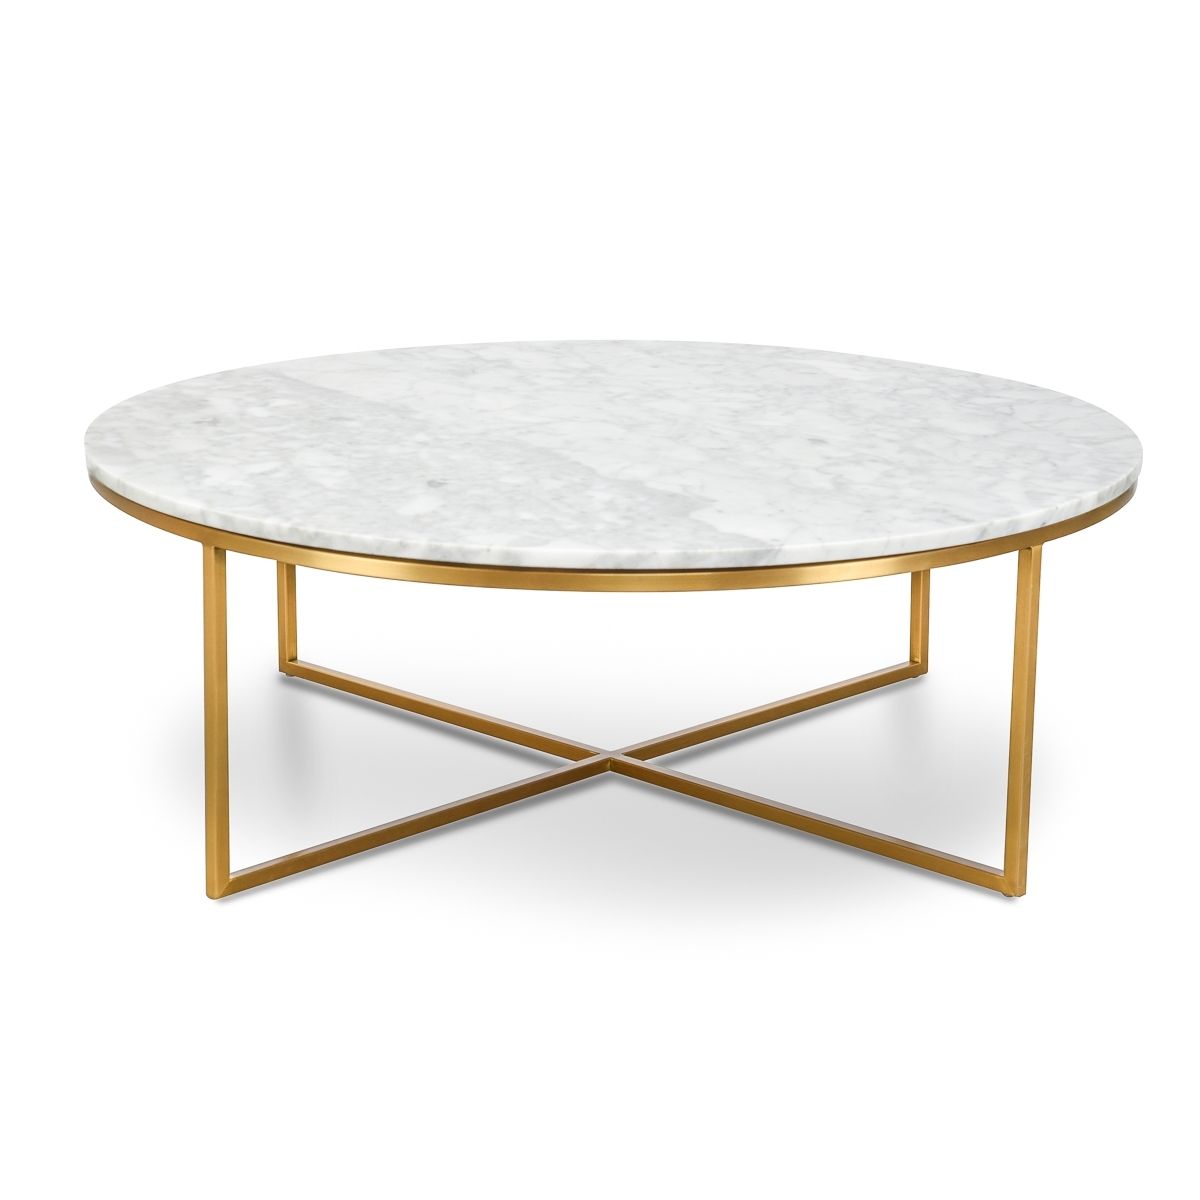 Lorenz Round Marble Coffee Table | Interior Secrets In 2 Tone Grey And White Marble Coffee Tables (View 12 of 30)